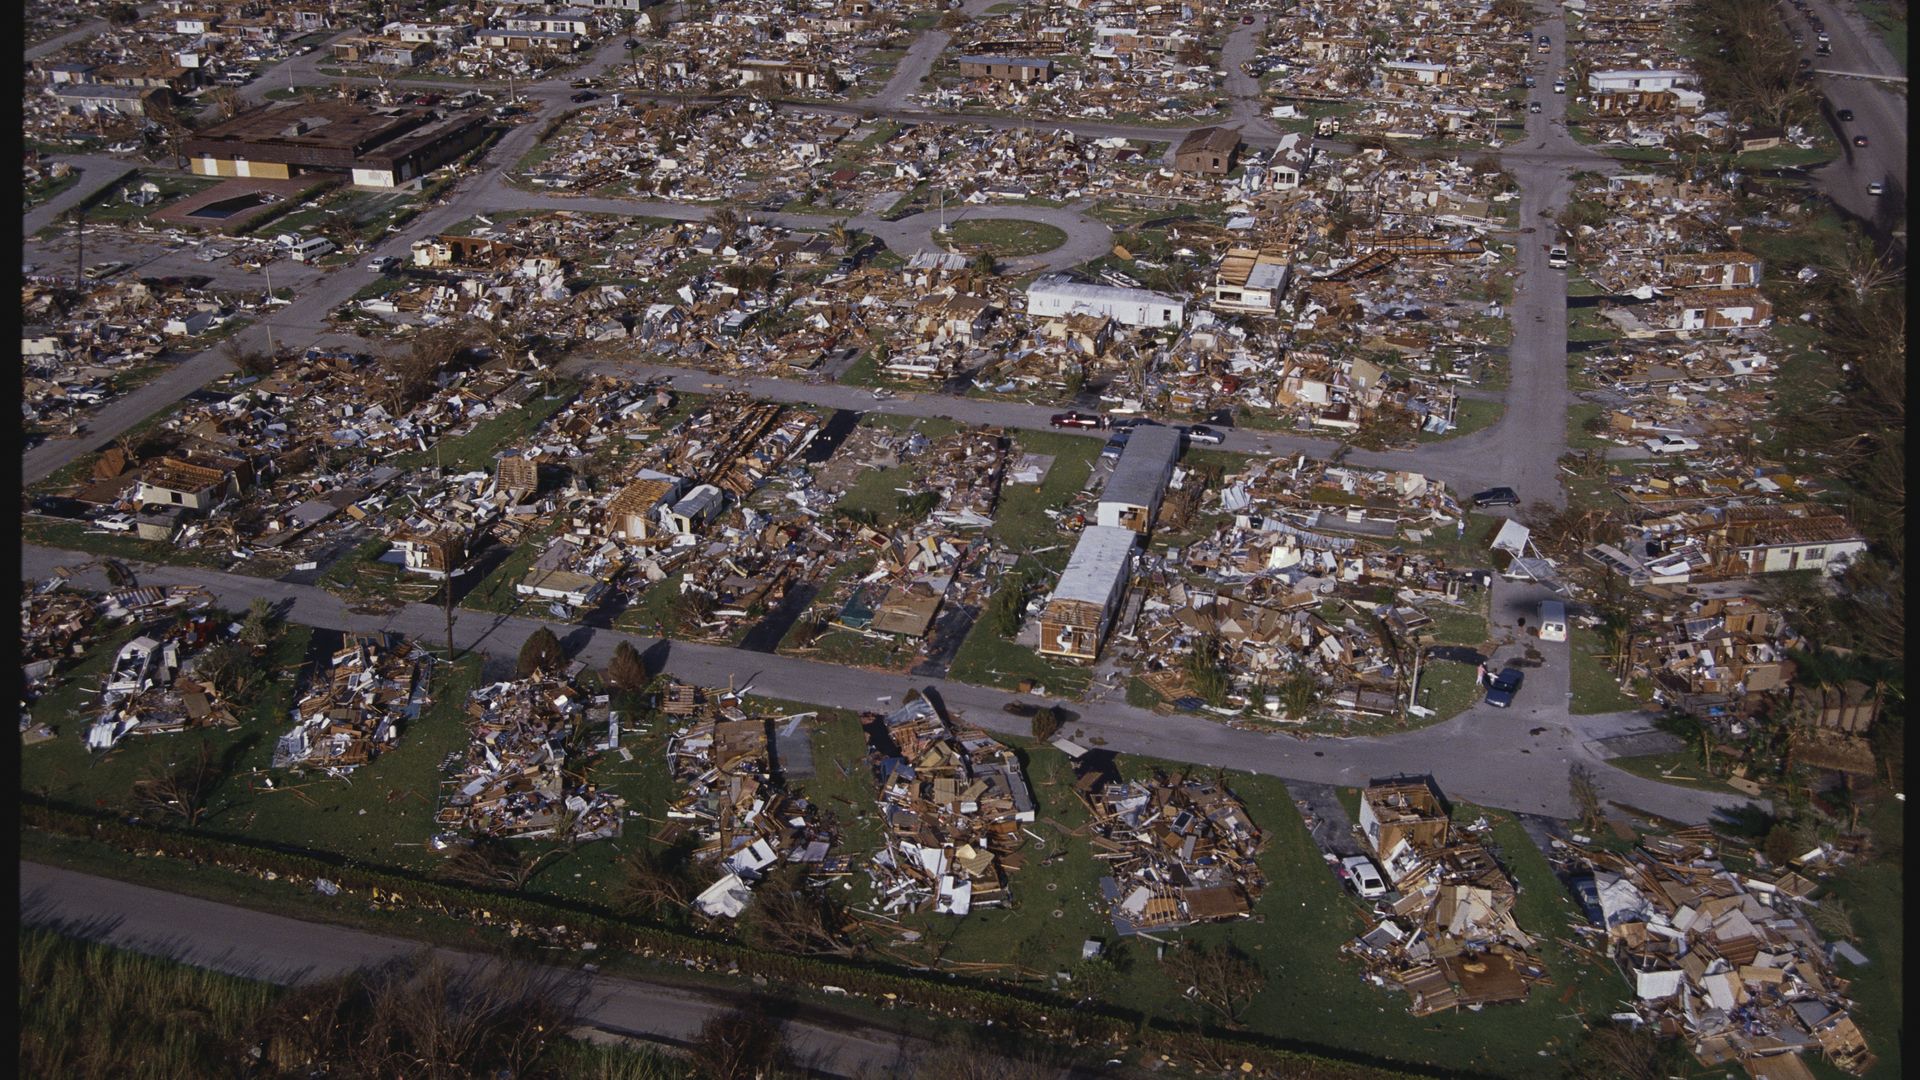 Homes were reduced to piles of rubble following Hurricane Andrew.